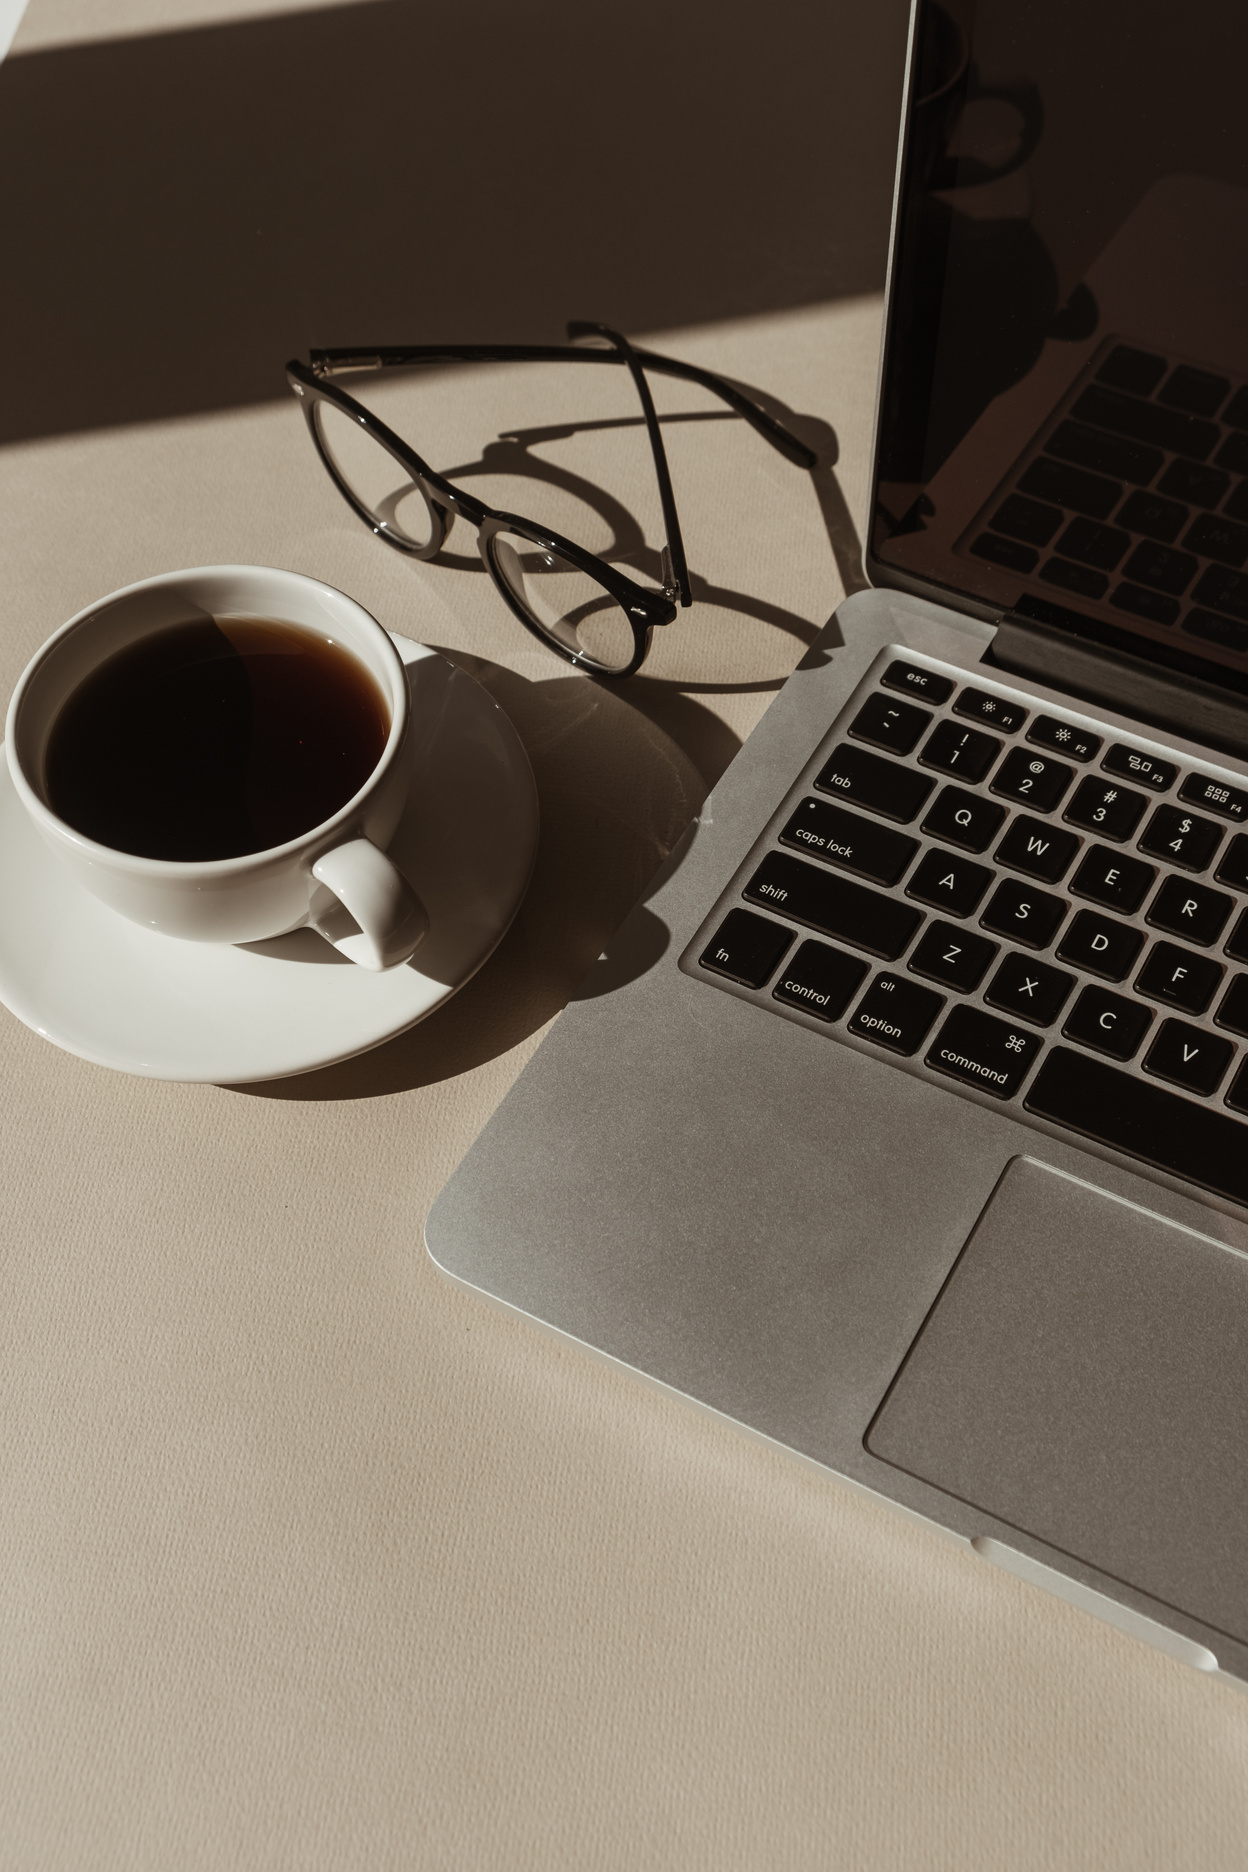 Coffee, Laptop, and Eyeglasses on the Table 